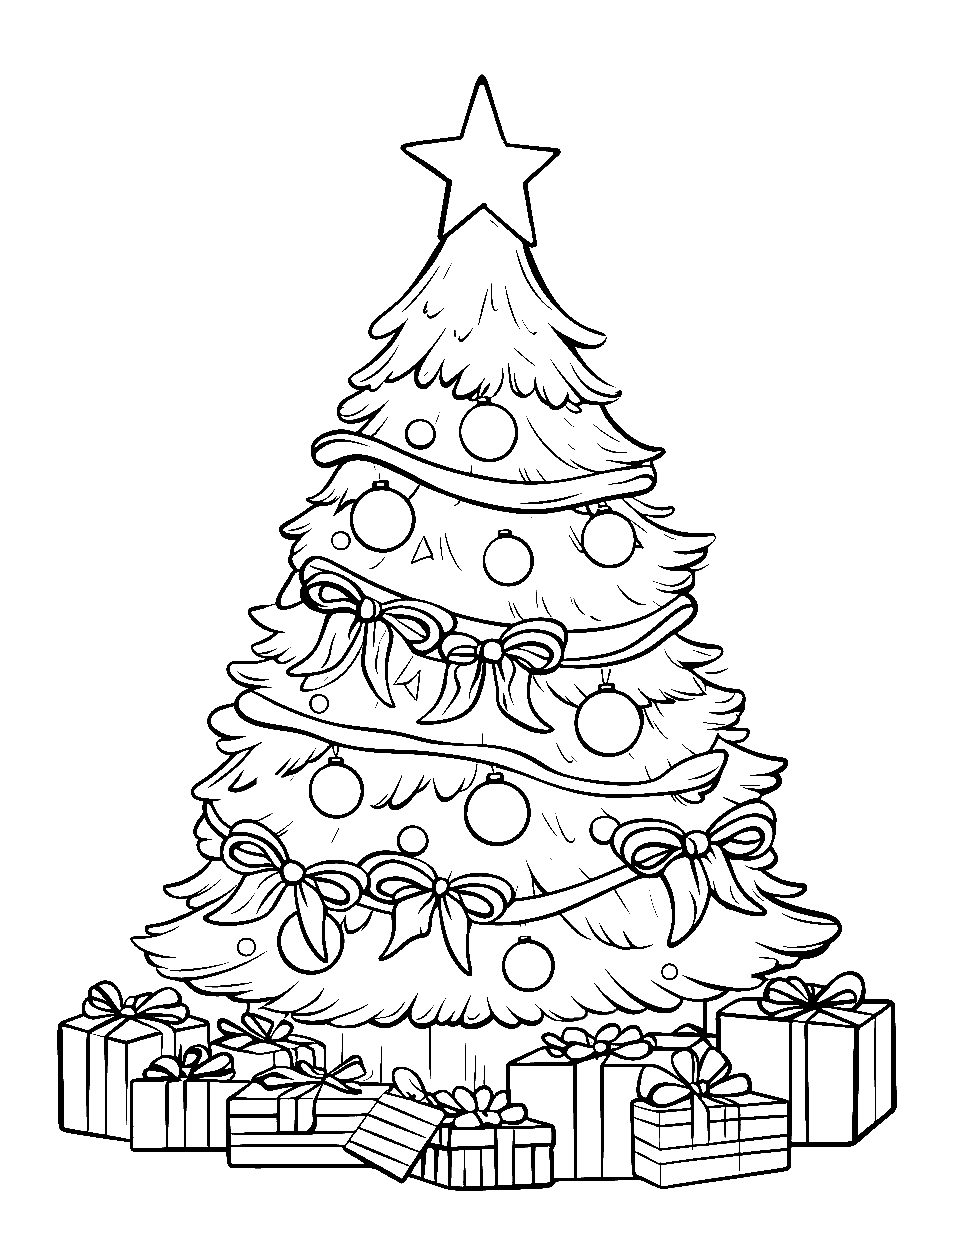 Merry Christmas Tree Coloring Page - A Christmas tree decorated with twinkling lights and colorful ornaments, surrounded by presents.